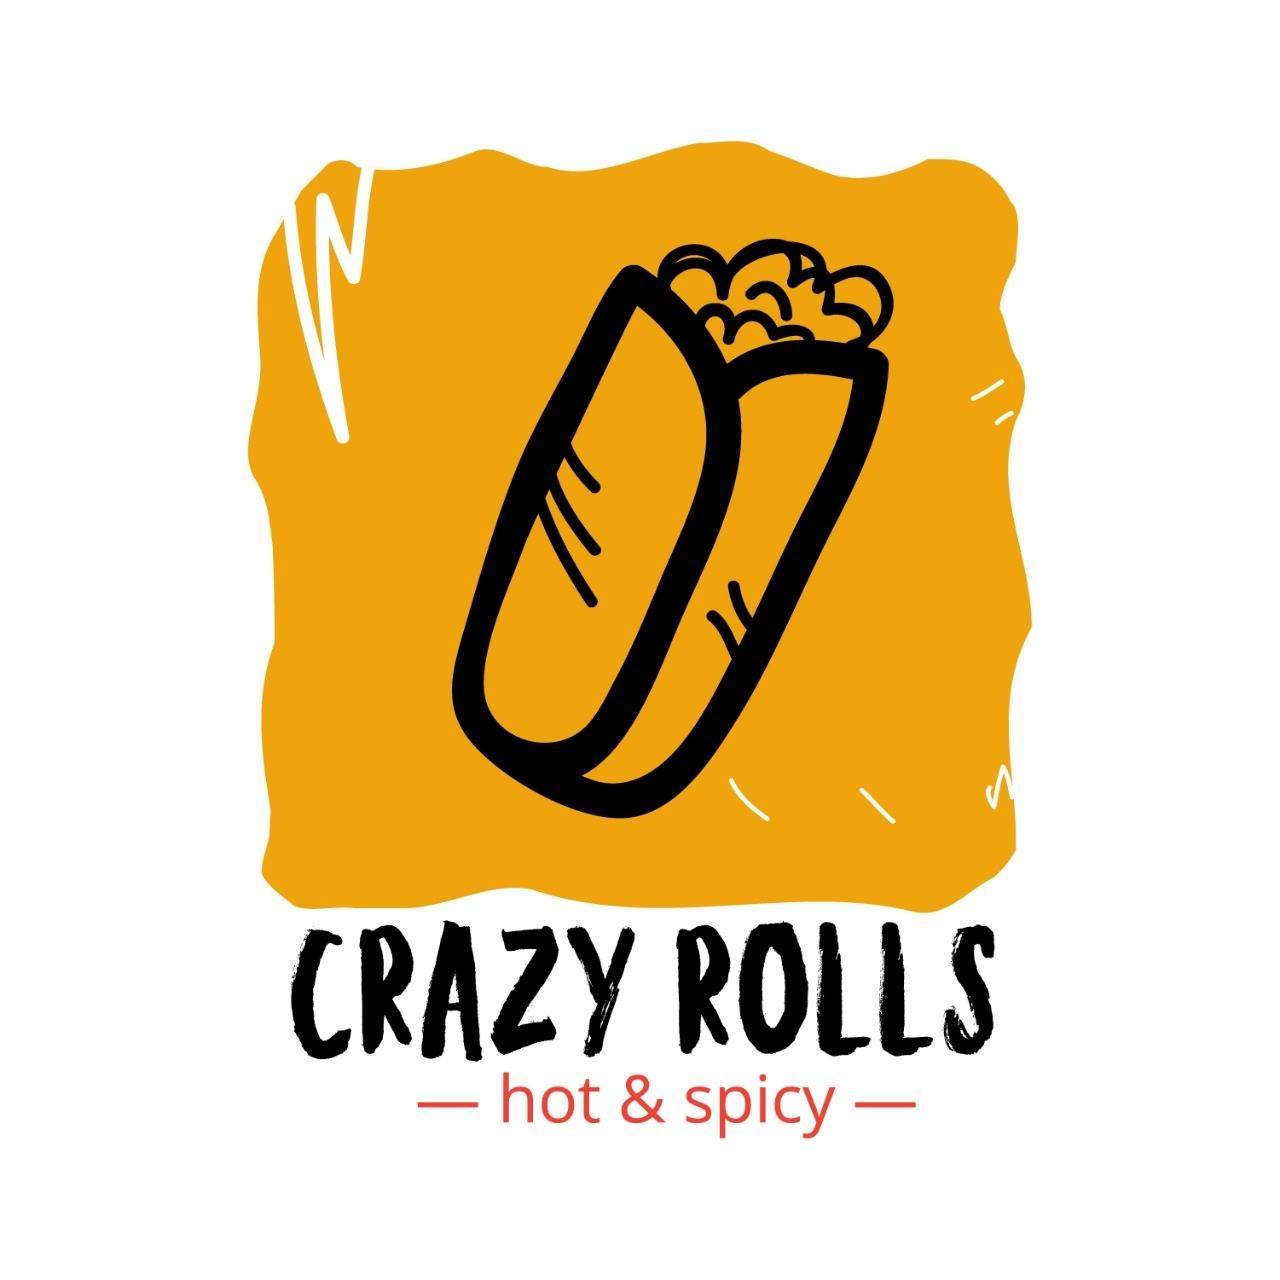 Franchise oppurtunities for Crazy Rolls in India